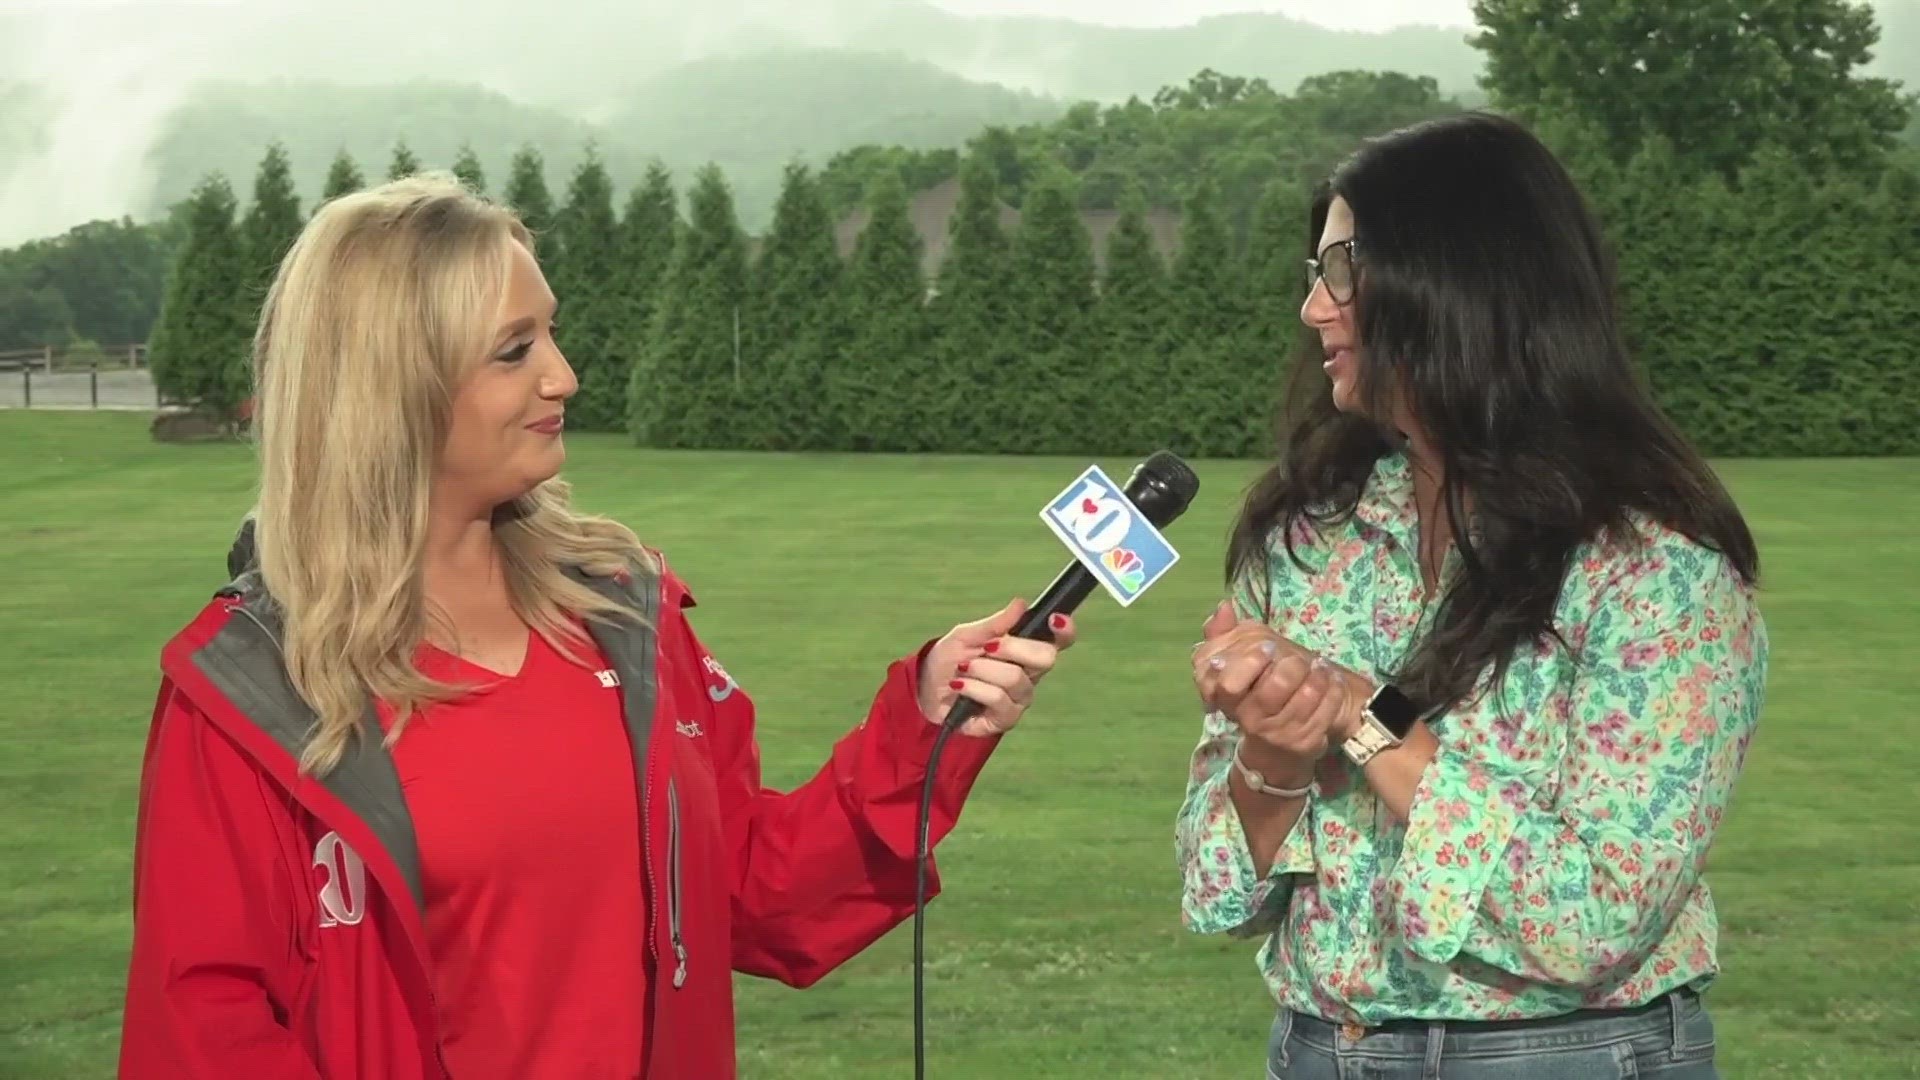 Kim Mitchell, with the Blount County Partnership, shares some upcoming fun activities to do, like the Hot Air Balloon Festival and the Grains & Grits Festival.